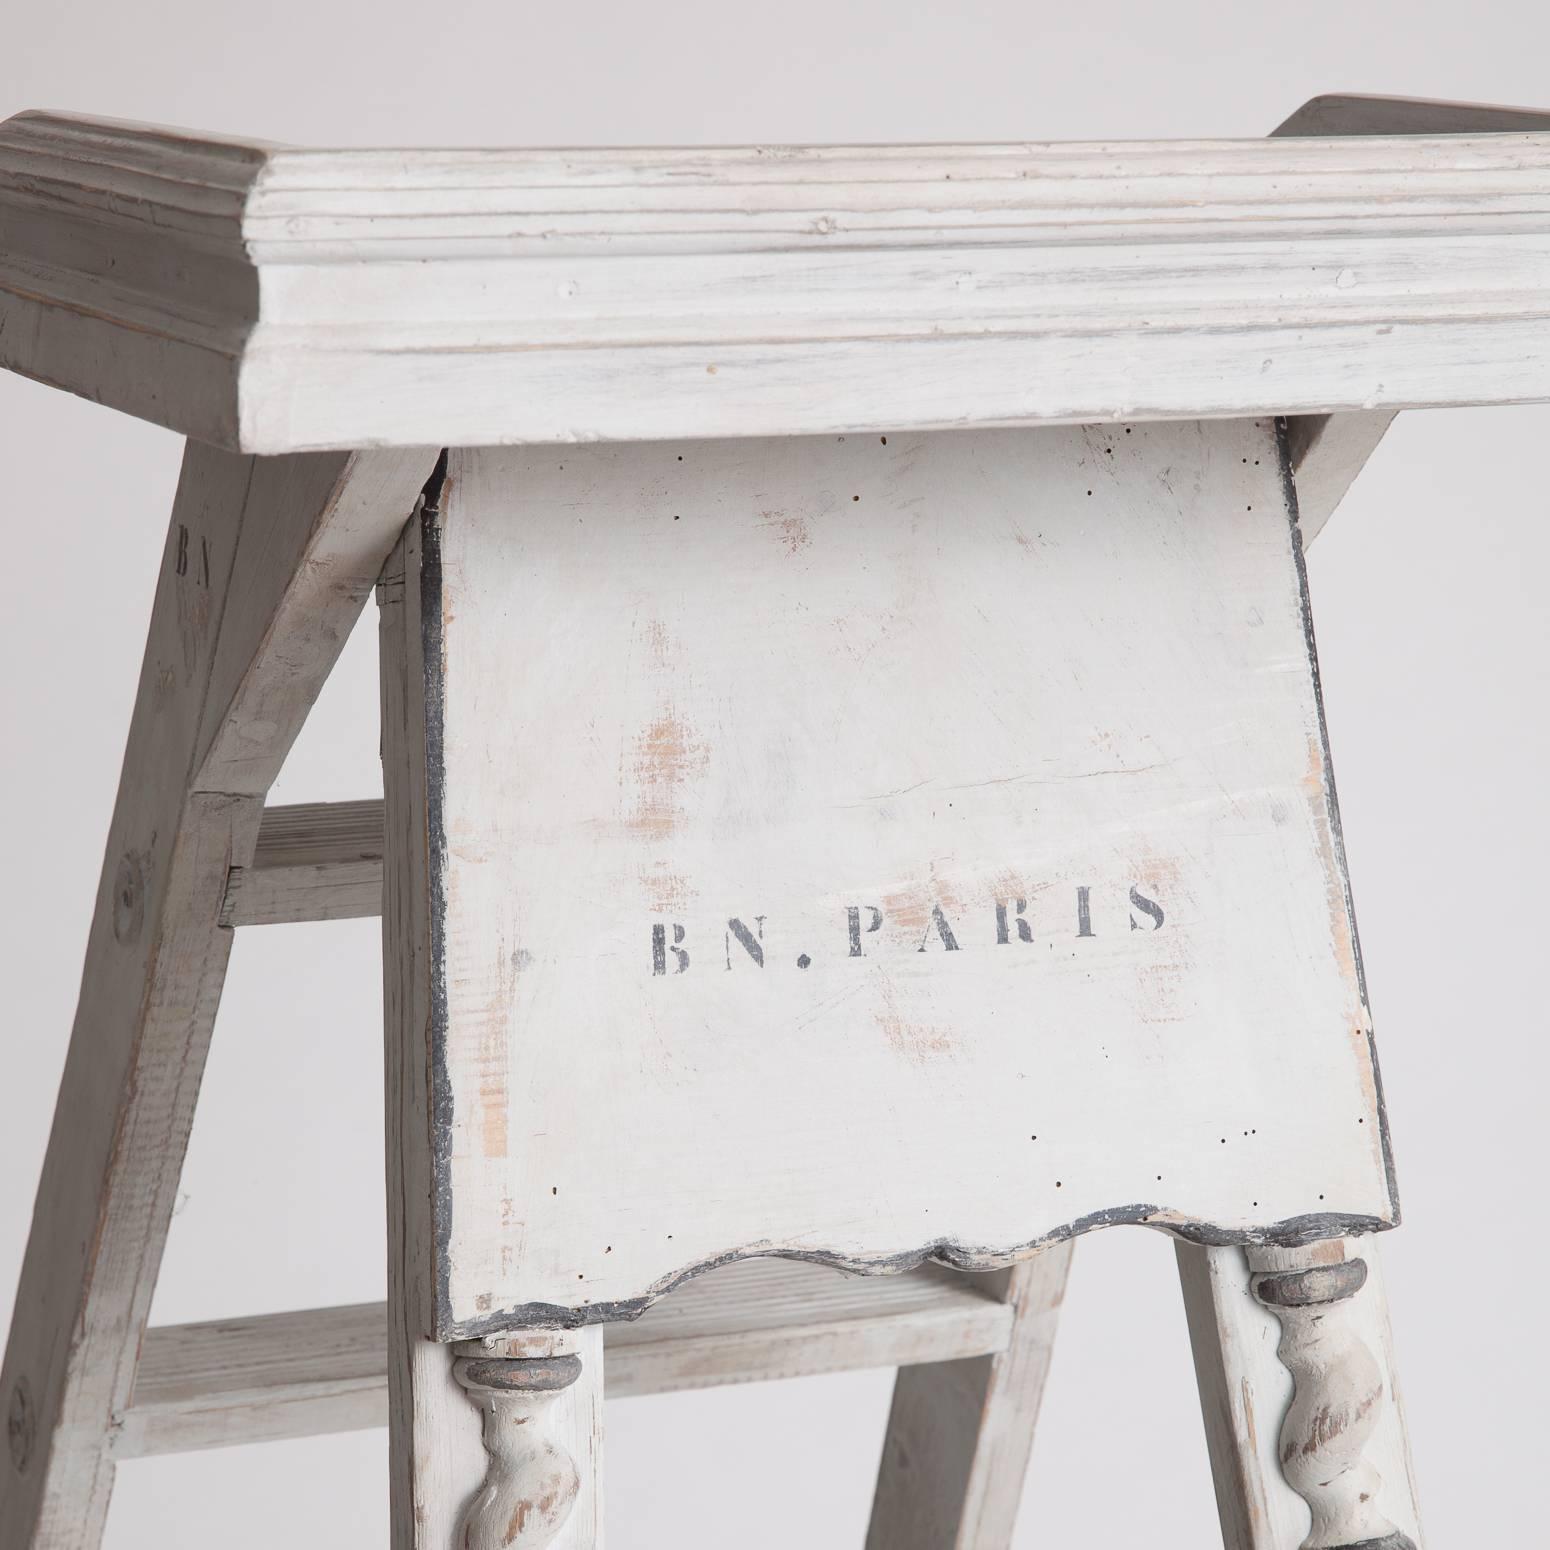 This wonderful old library ladder comes from a group of ladders that were deasessioned from the Bibliotheque National of Paris in the first half of the 20th century. With an old grey paint surface, a convenient top shelf for books, and applied